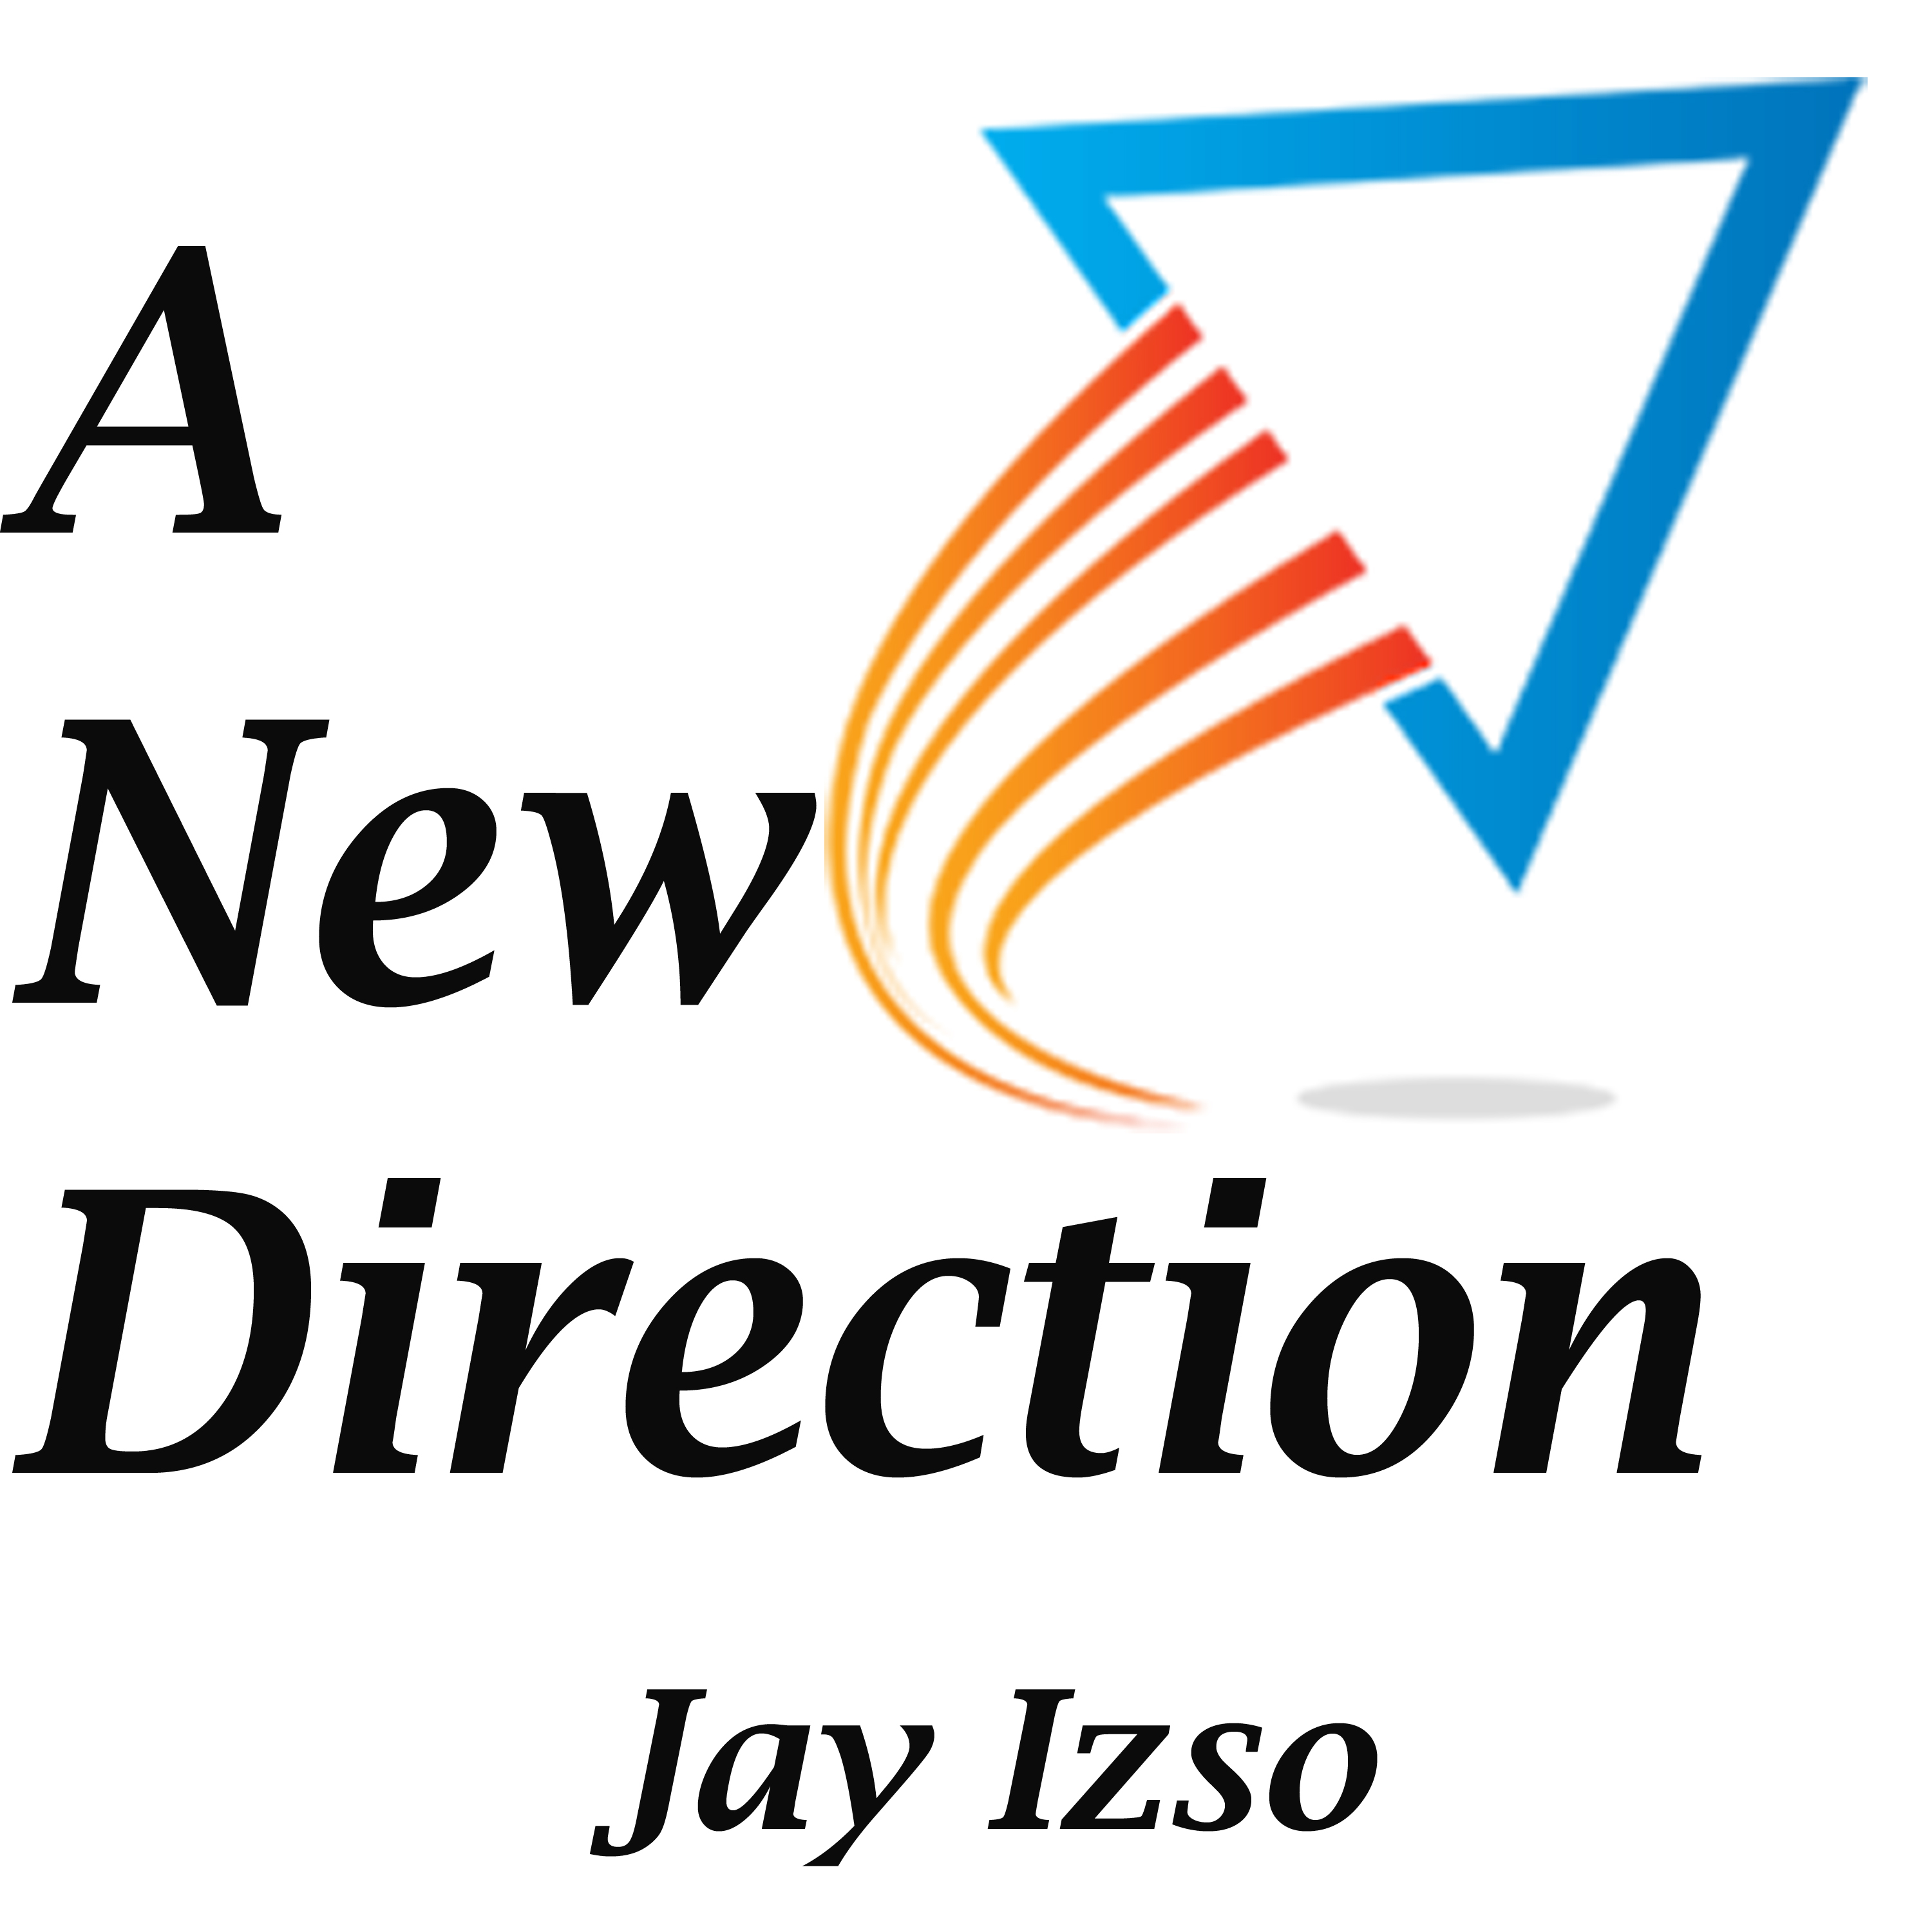 A New Direction